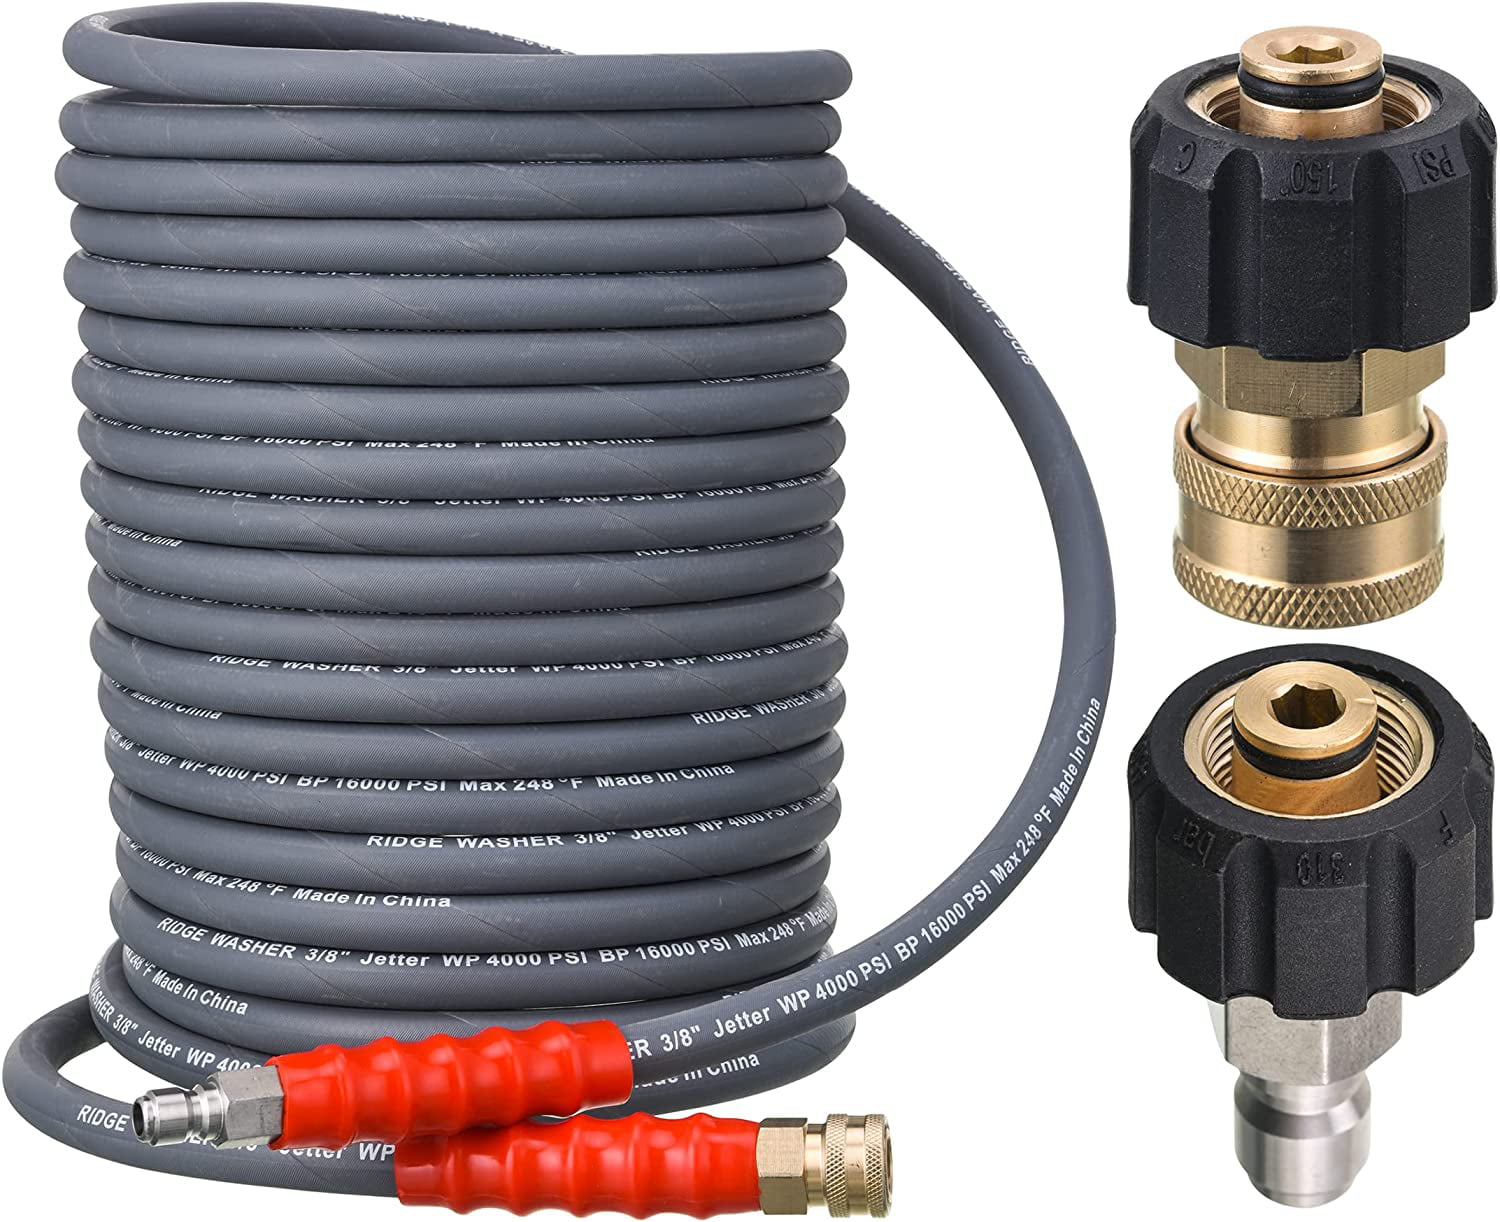 YAMATIC Pressure Washer Hose 1/4 x 100 FT Pro-Flexible & Non-Marking Swivel 3/8 Quick Connect with M22-14mm Adapters 4200 PSI Hot & Cold Water Replacement/Extension for Power Washers 